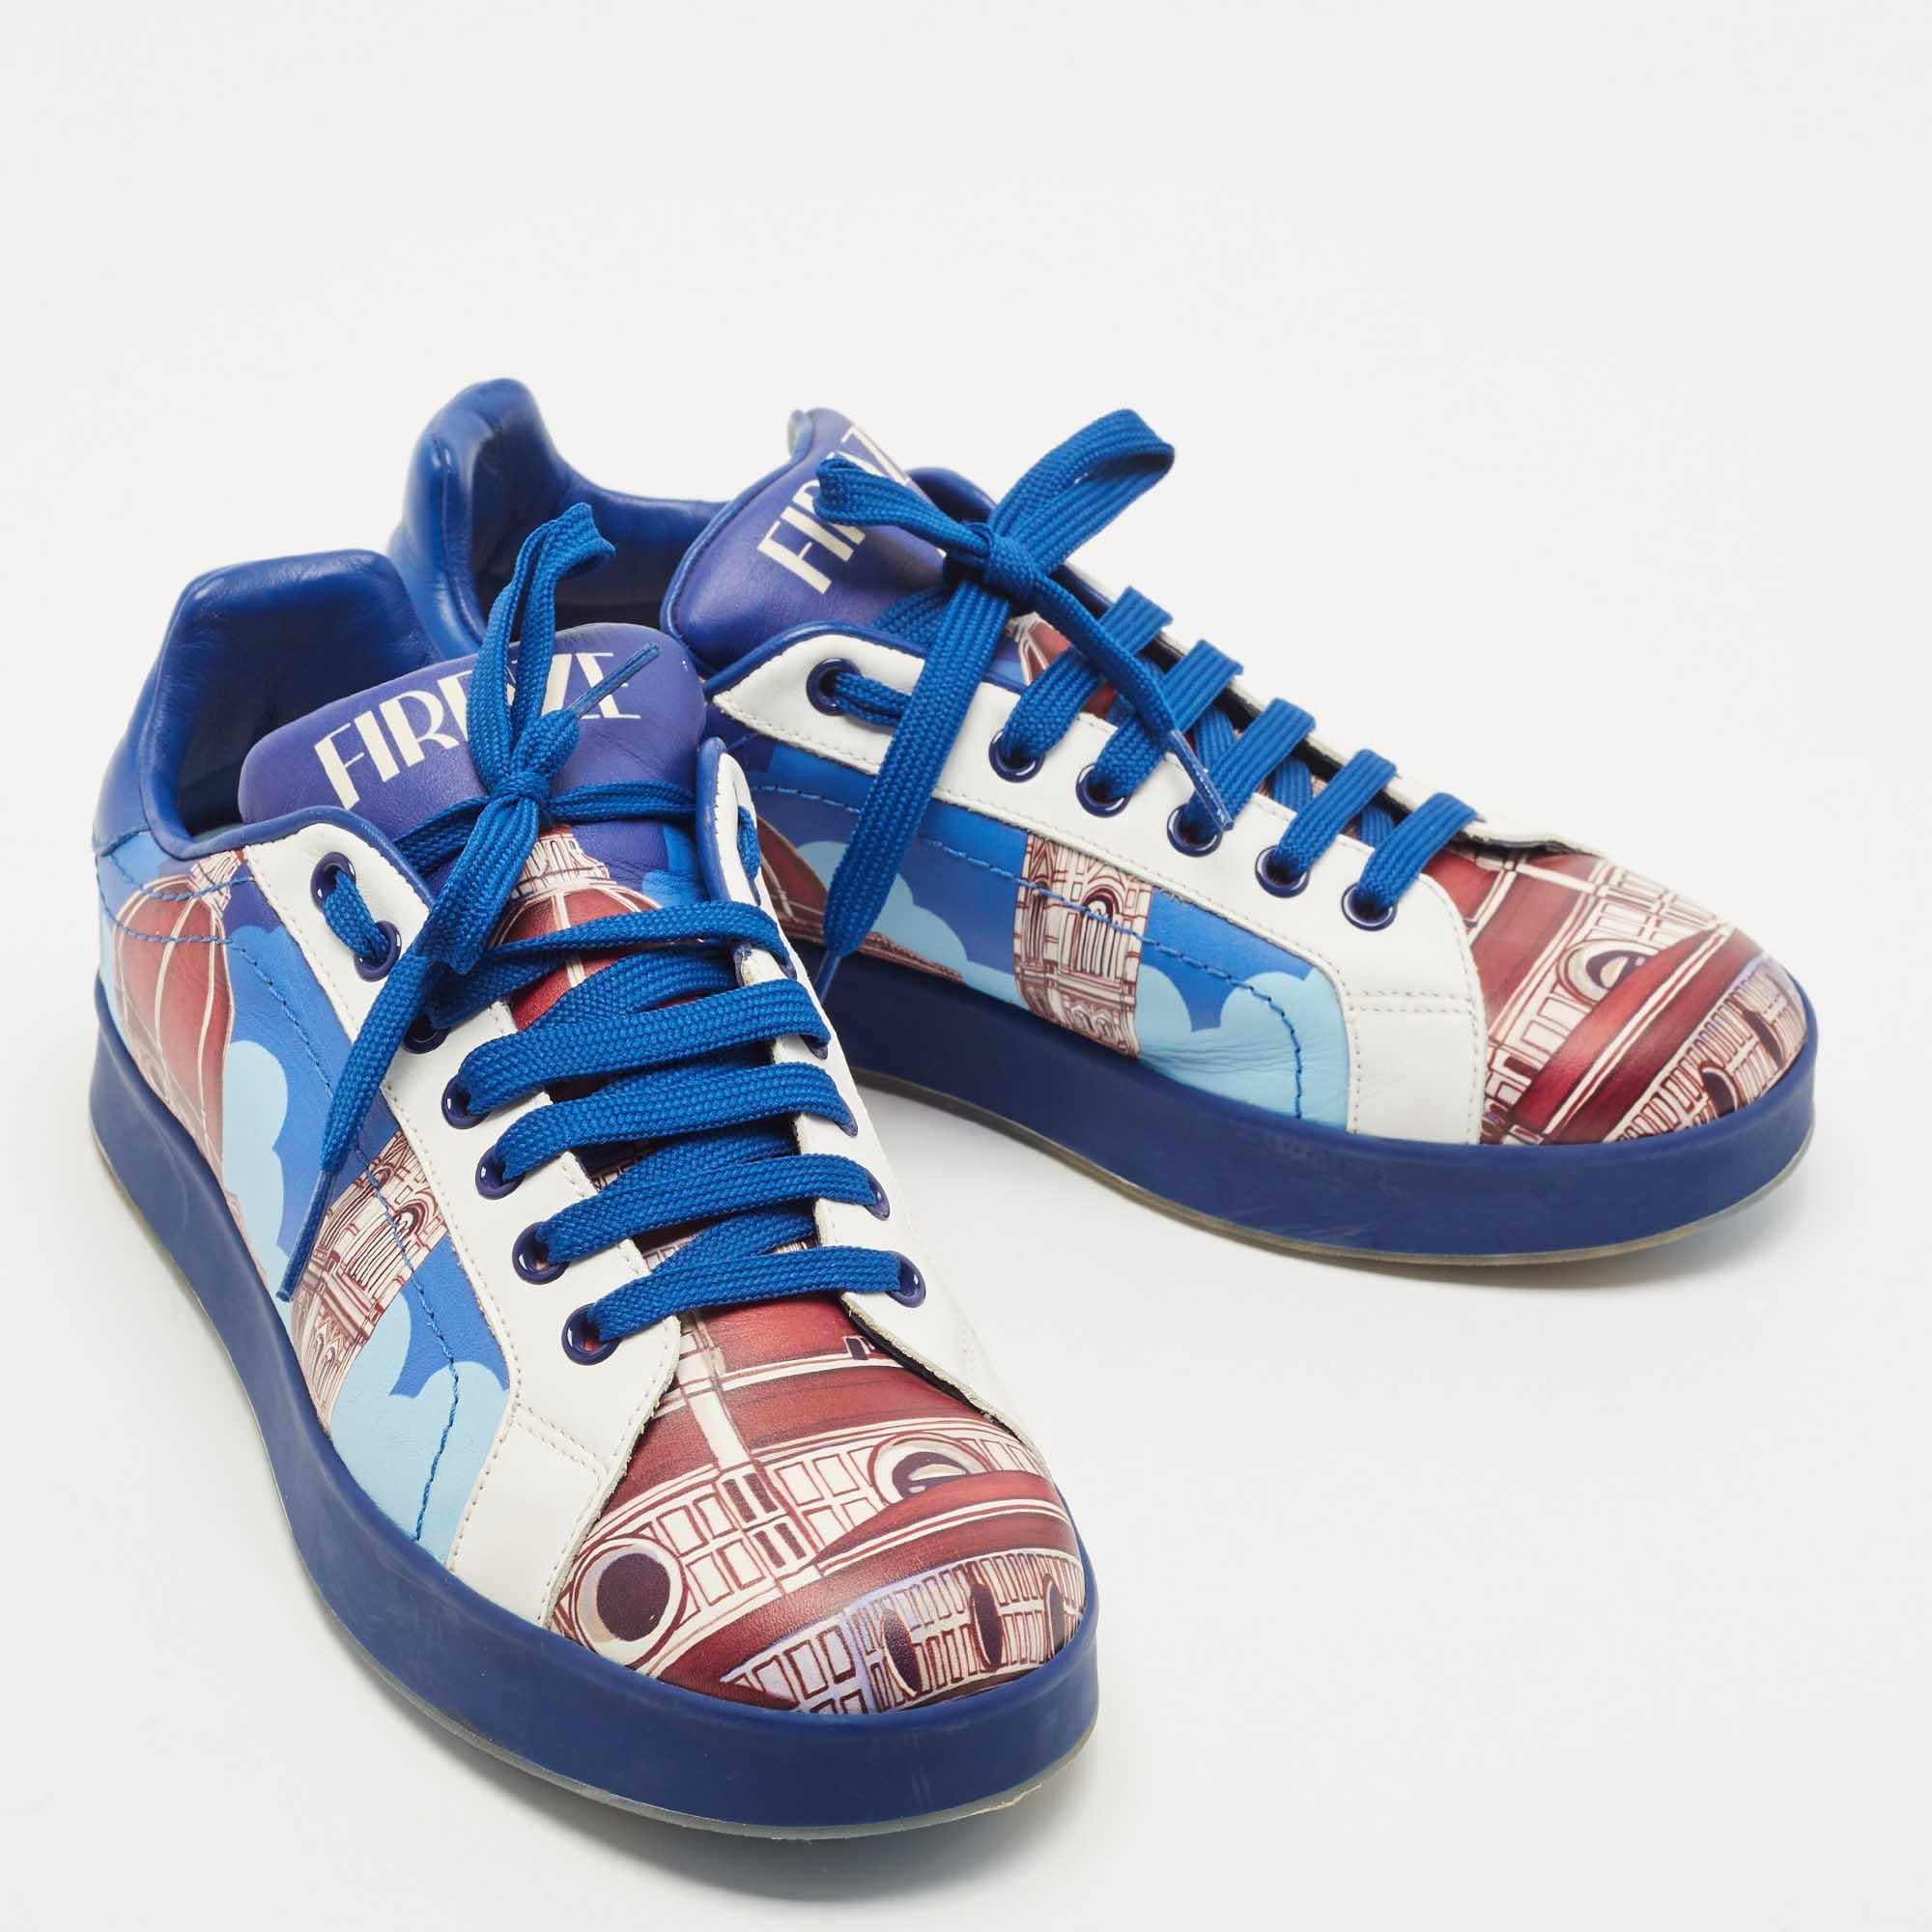 Dolce & Gabbana Tricolor Printed Leather Low Top Sneakers Size 39.5 In Good Condition In Dubai, Al Qouz 2